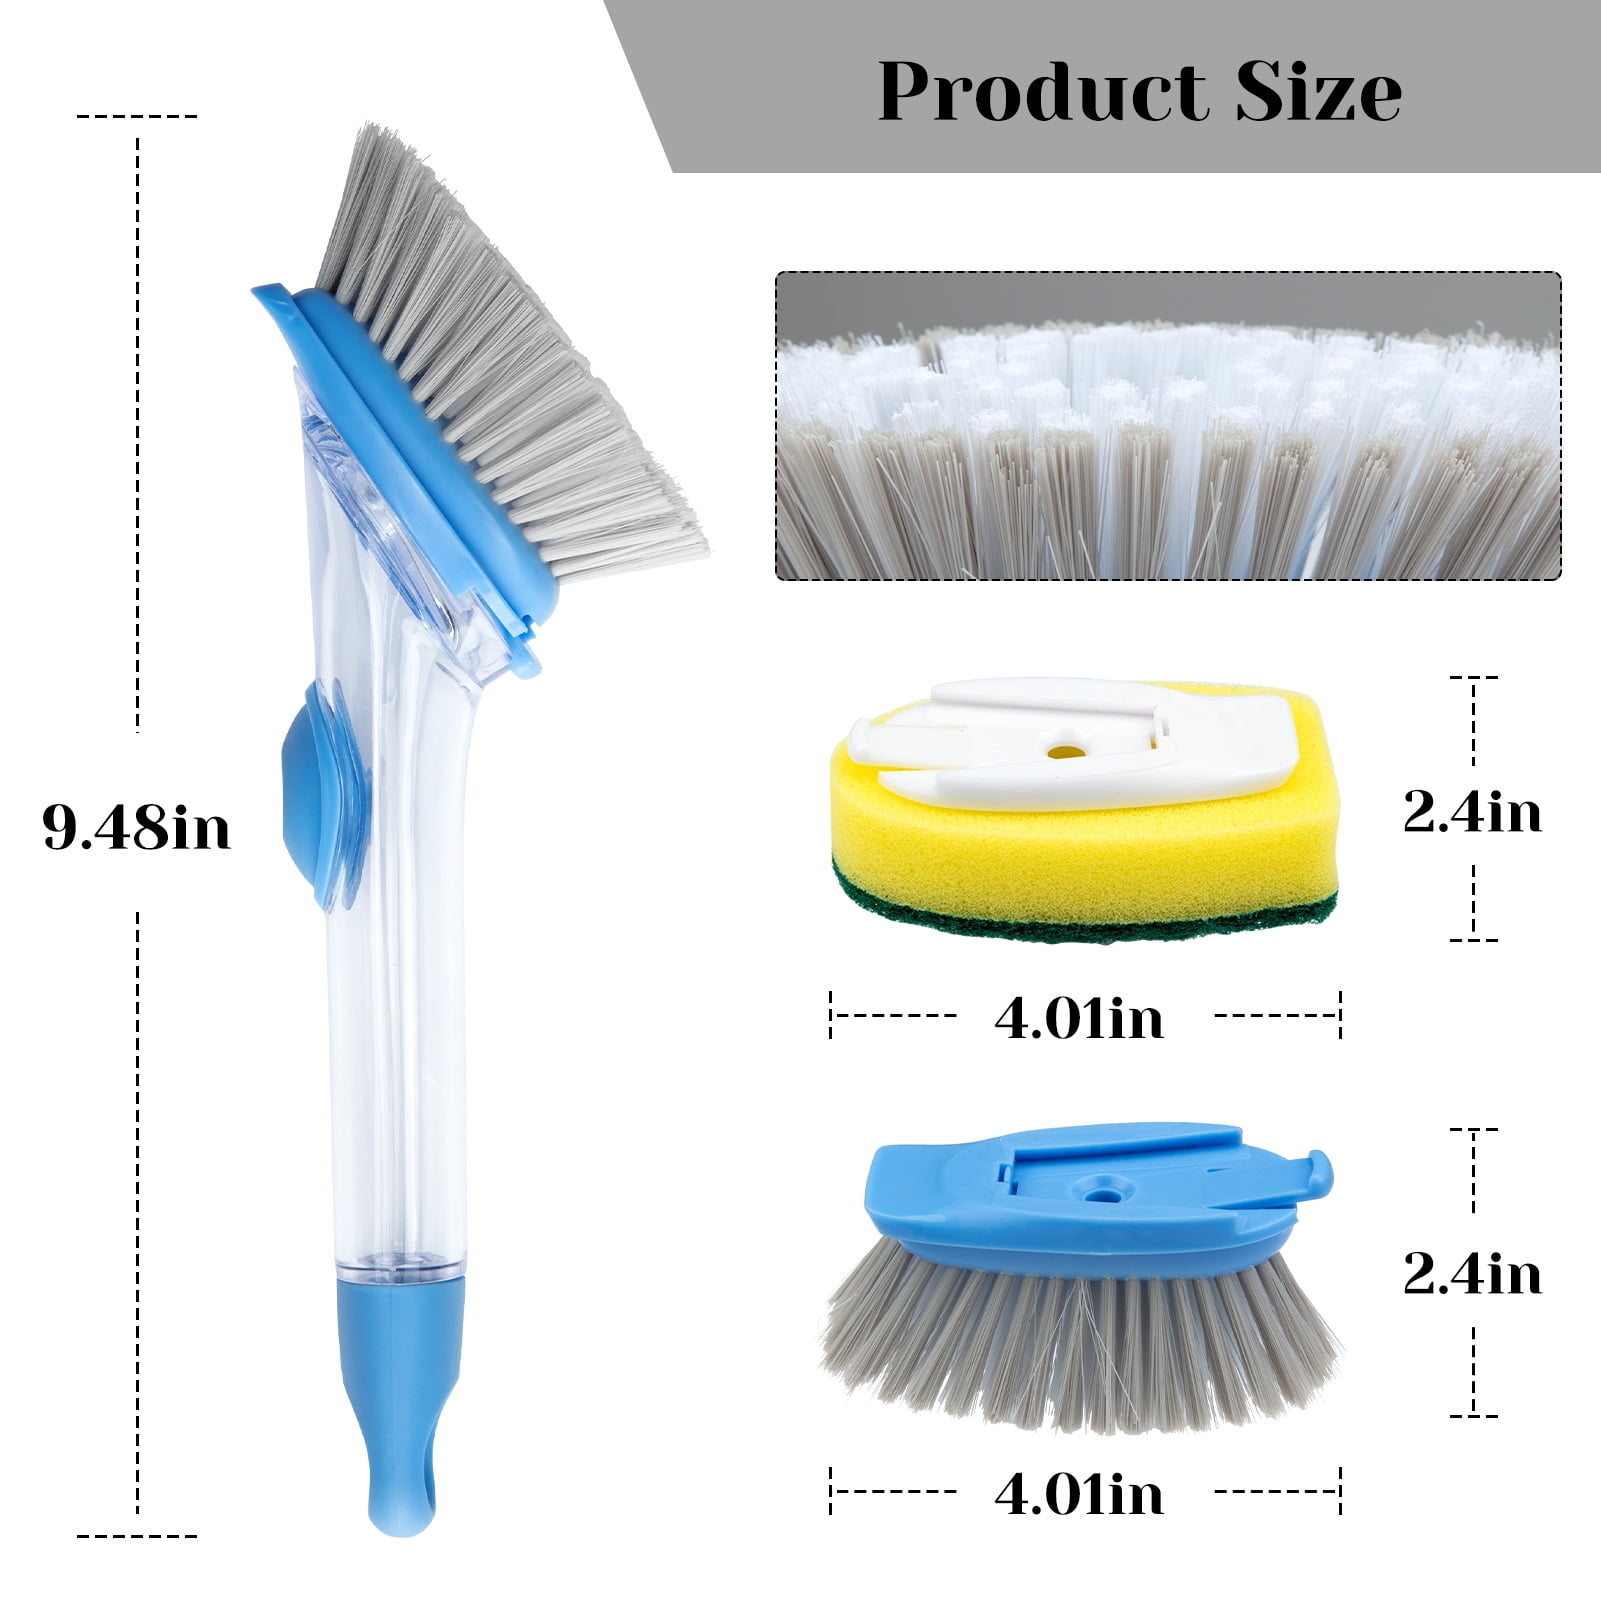 Spogears Dish Brush 3 Pack - Dish Scrubber Brush with Built-in Scraper - Kitchen Brush for Dishes - Kitchen Scrub Brush with Grip Friendly Handle - di